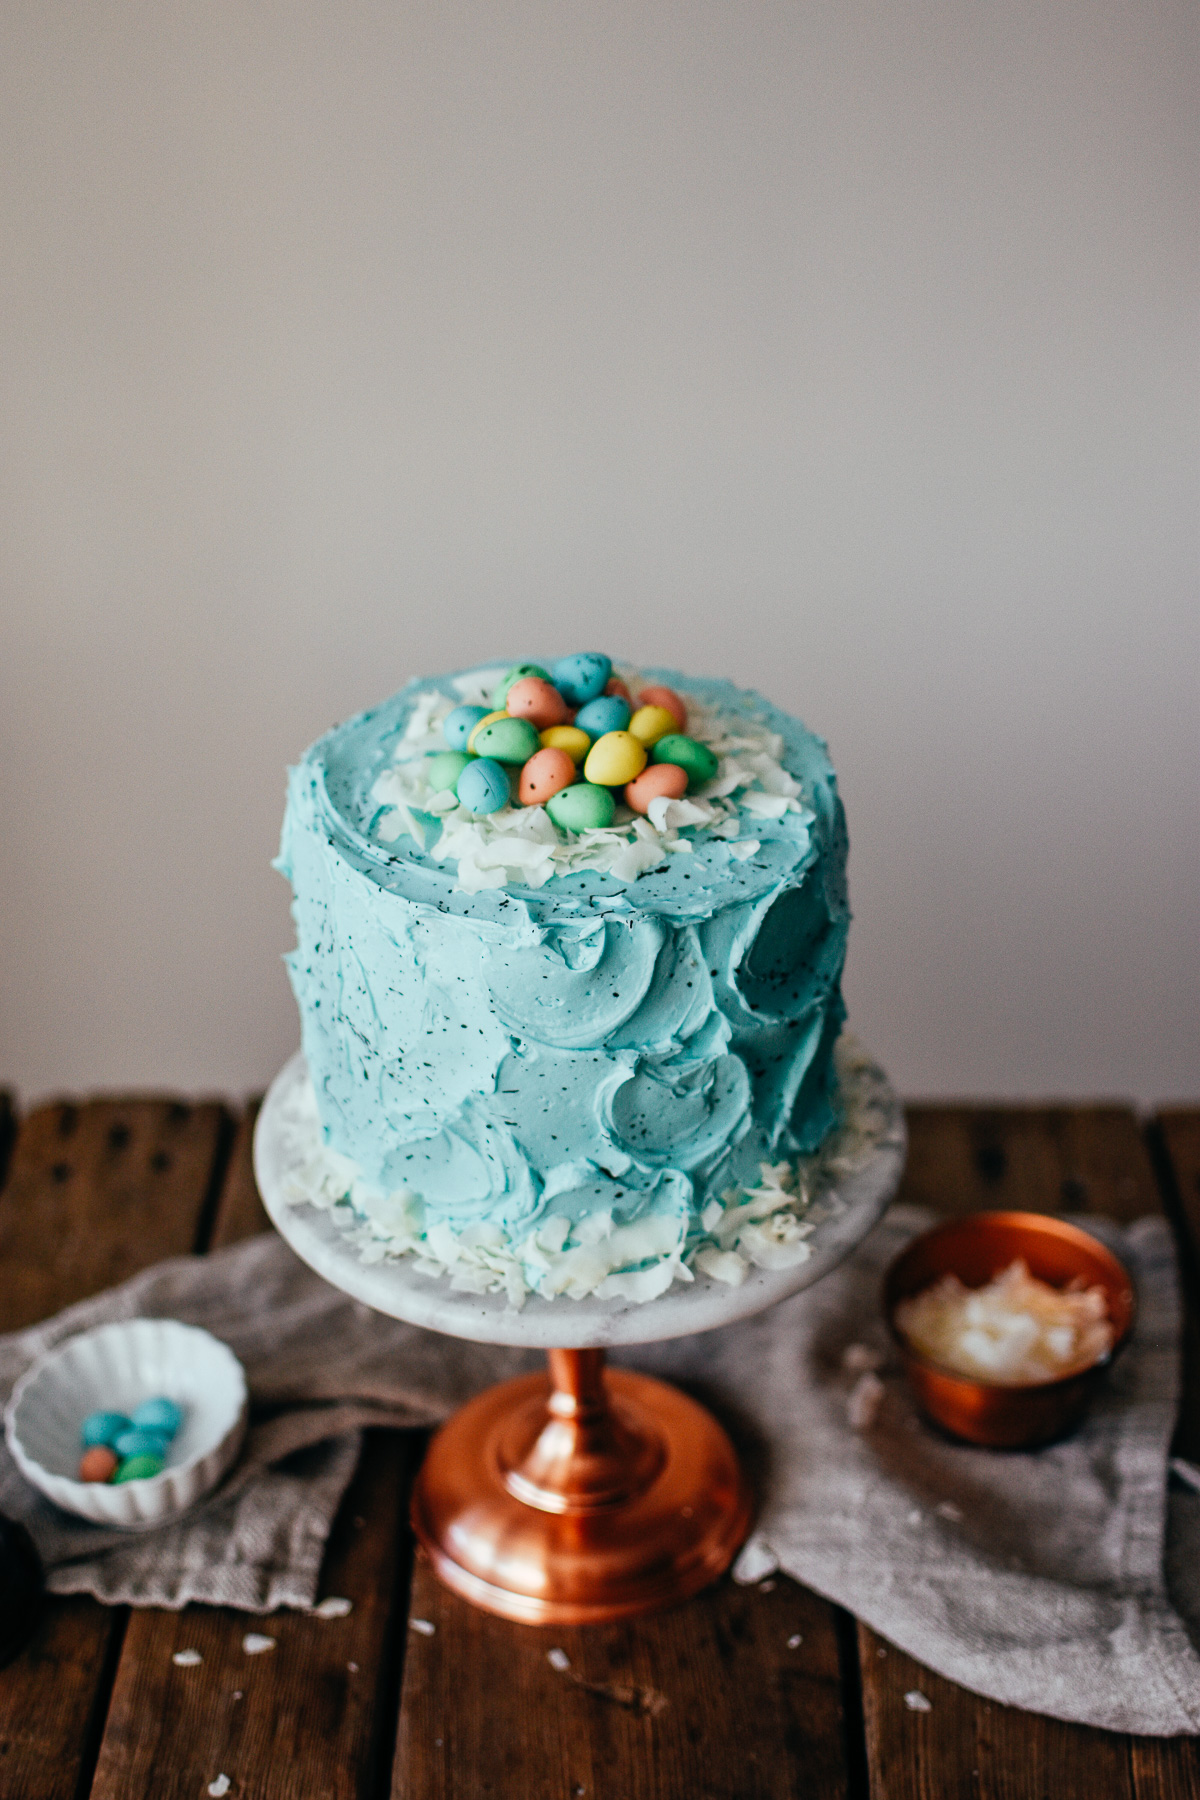 20 Amazing Easter Brunch Desserts You'll Rise For!